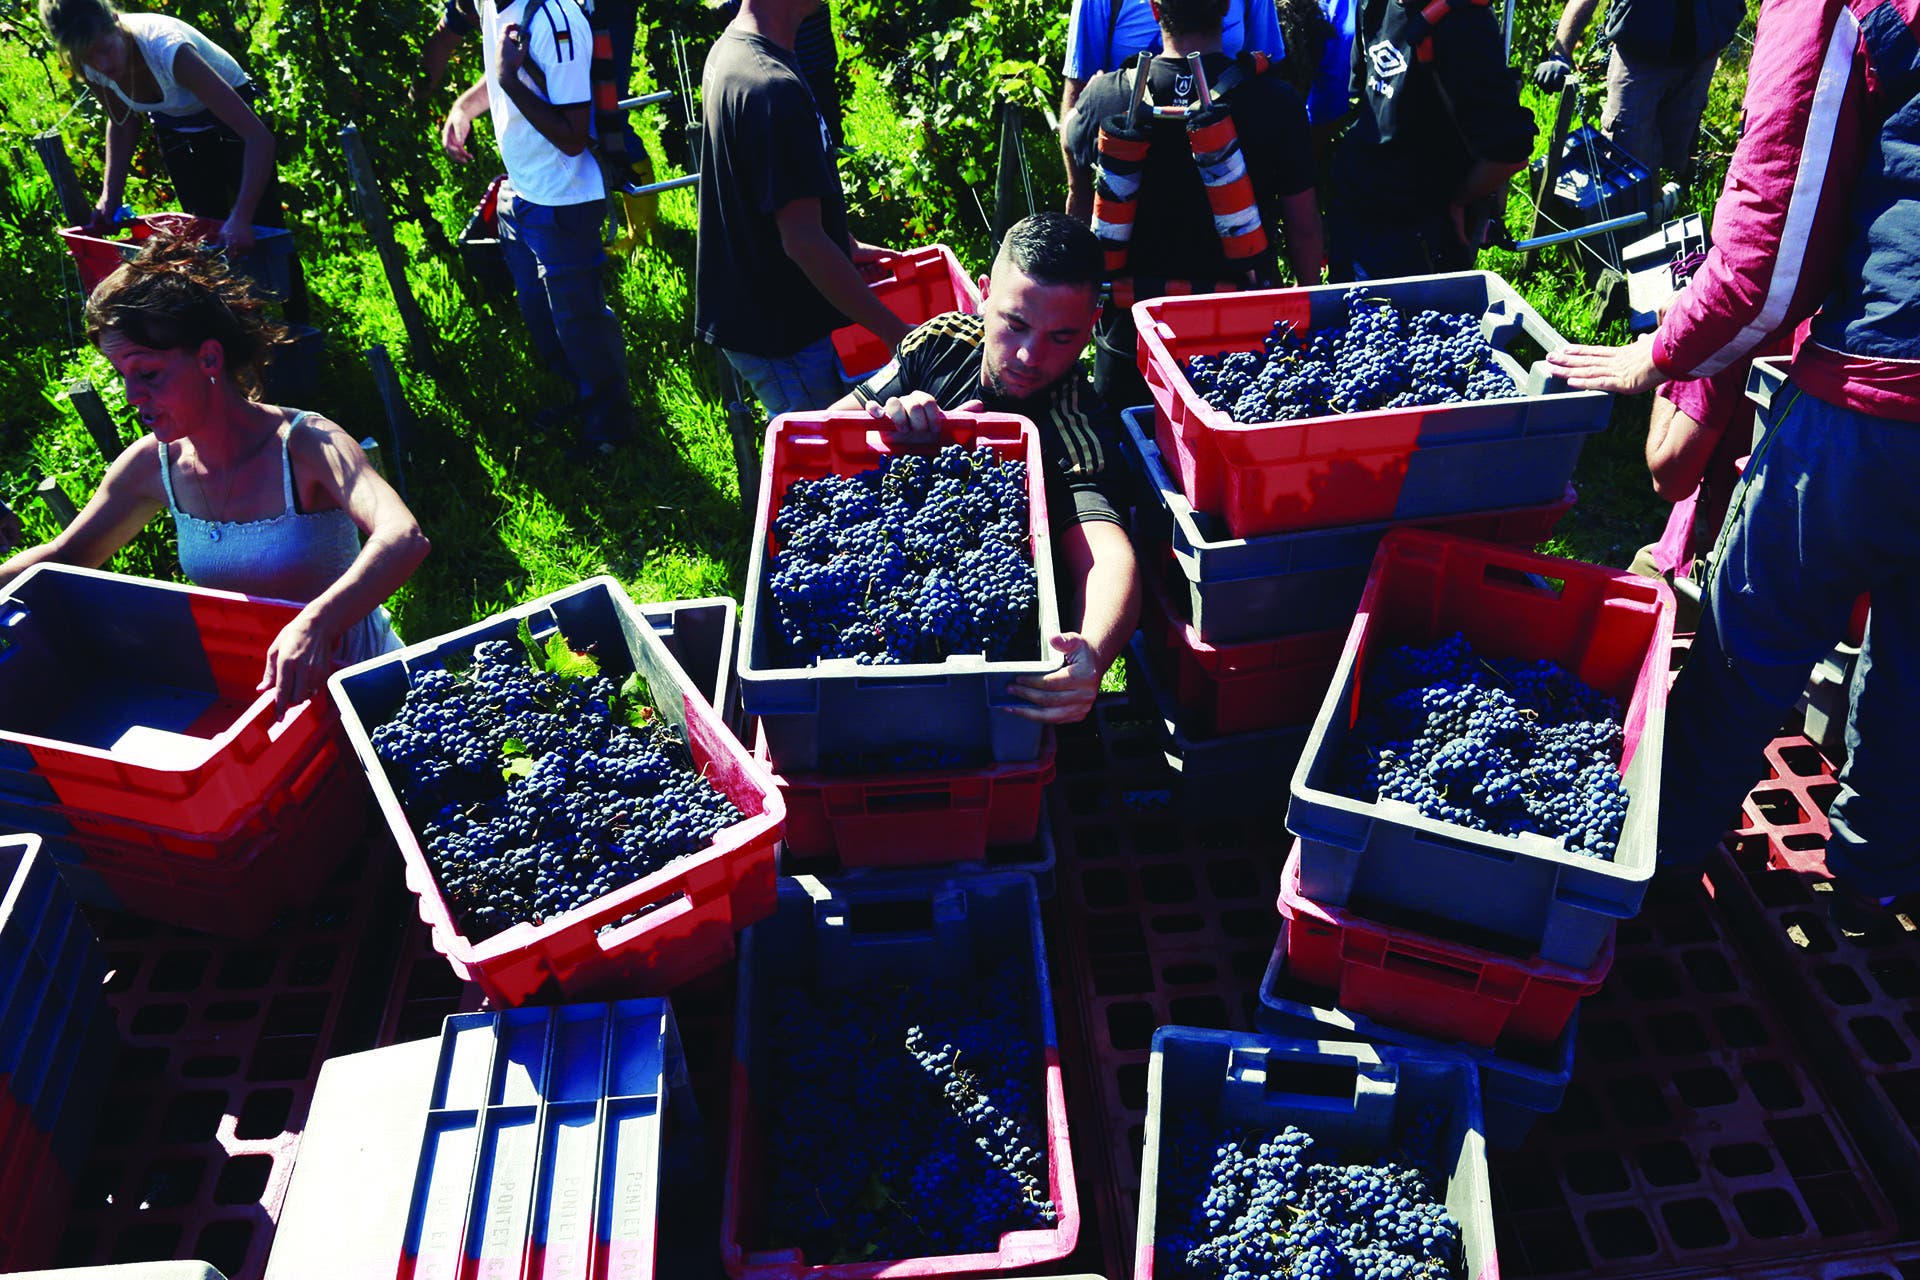 Five red plastic boxes, each full of deep purple grapes, in a green field, workers at top